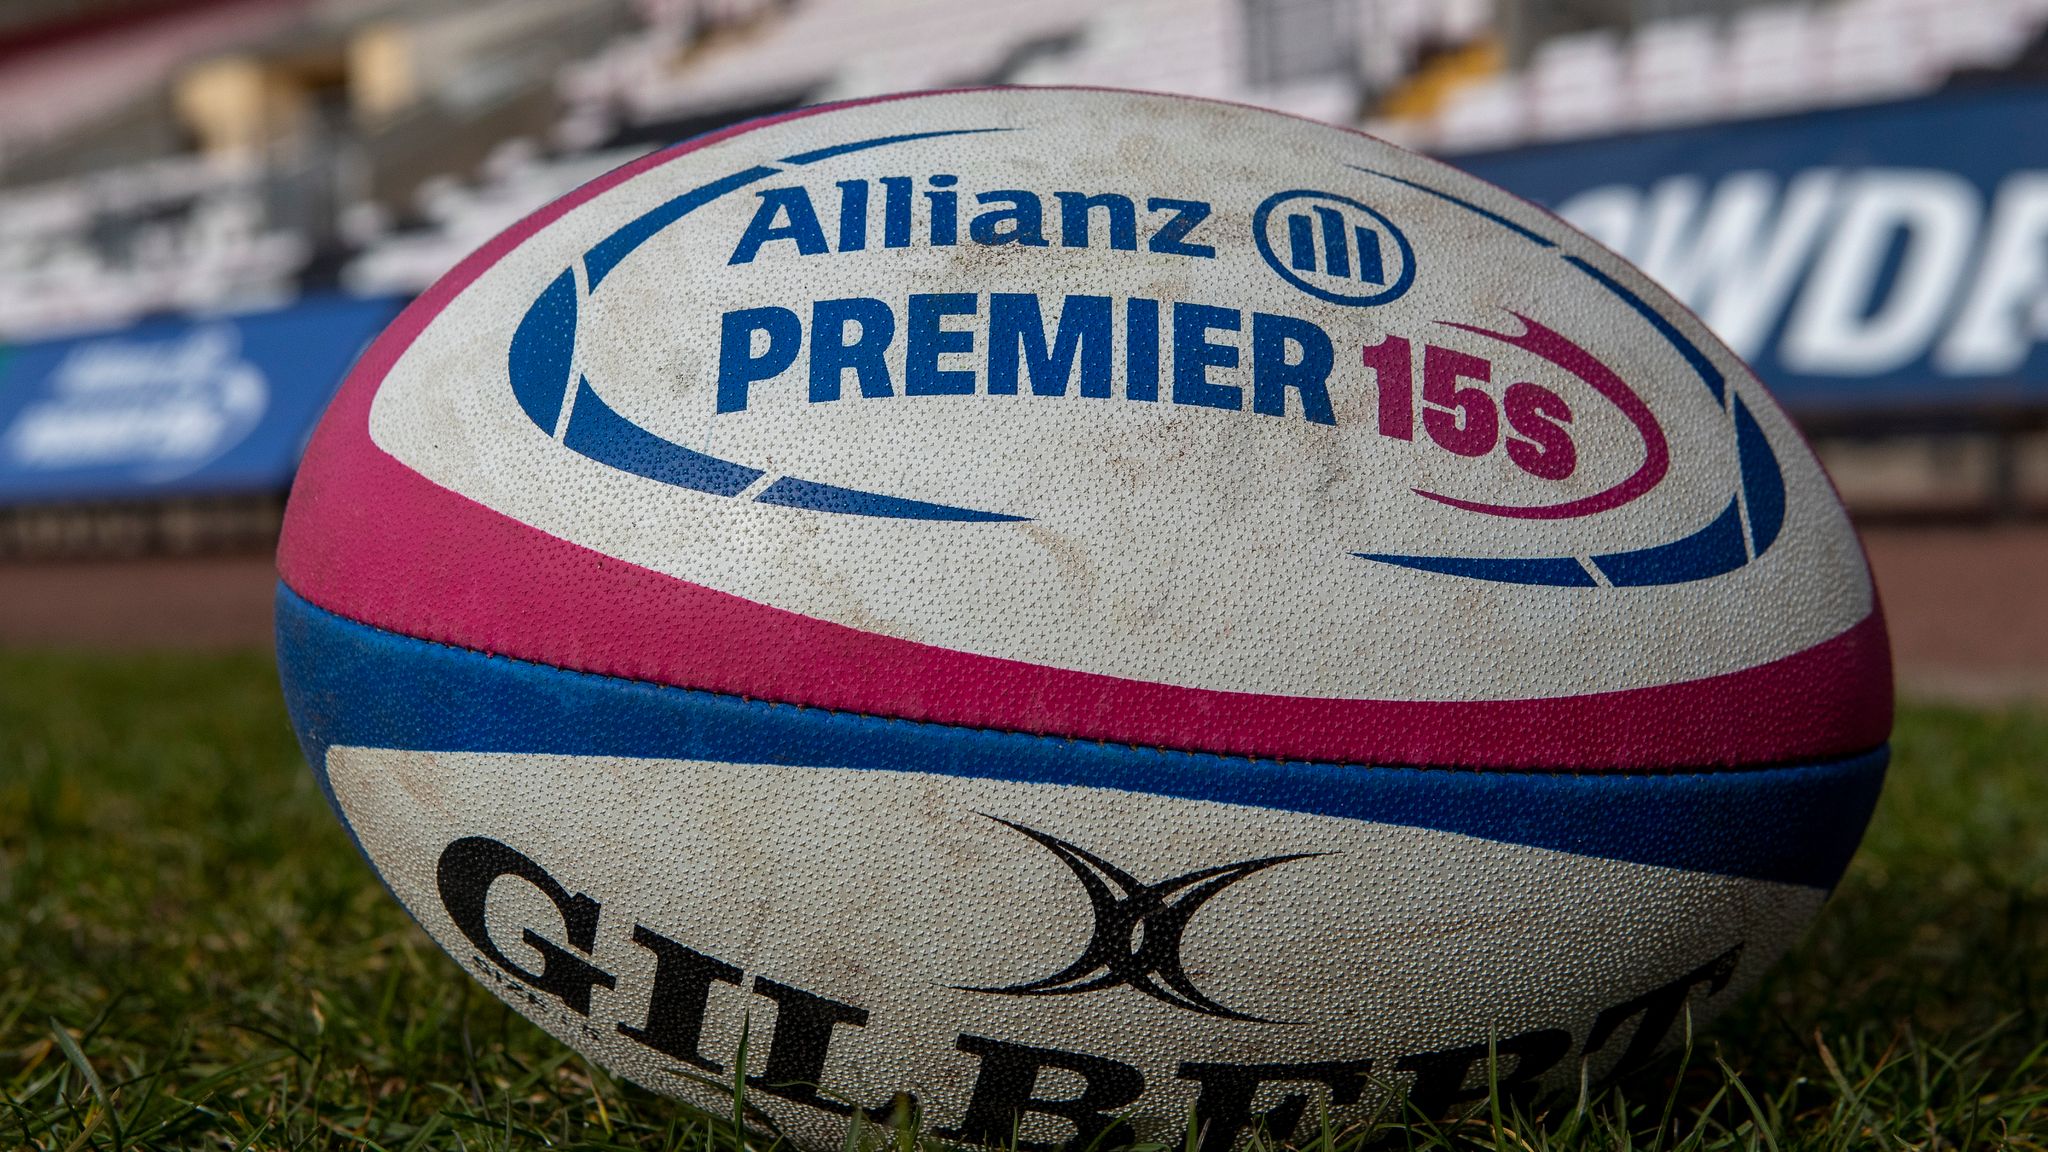 Allianz Premier 15s DMP Durham Sharks remain in competition after sourcing funding Rugby Union News Sky Sports